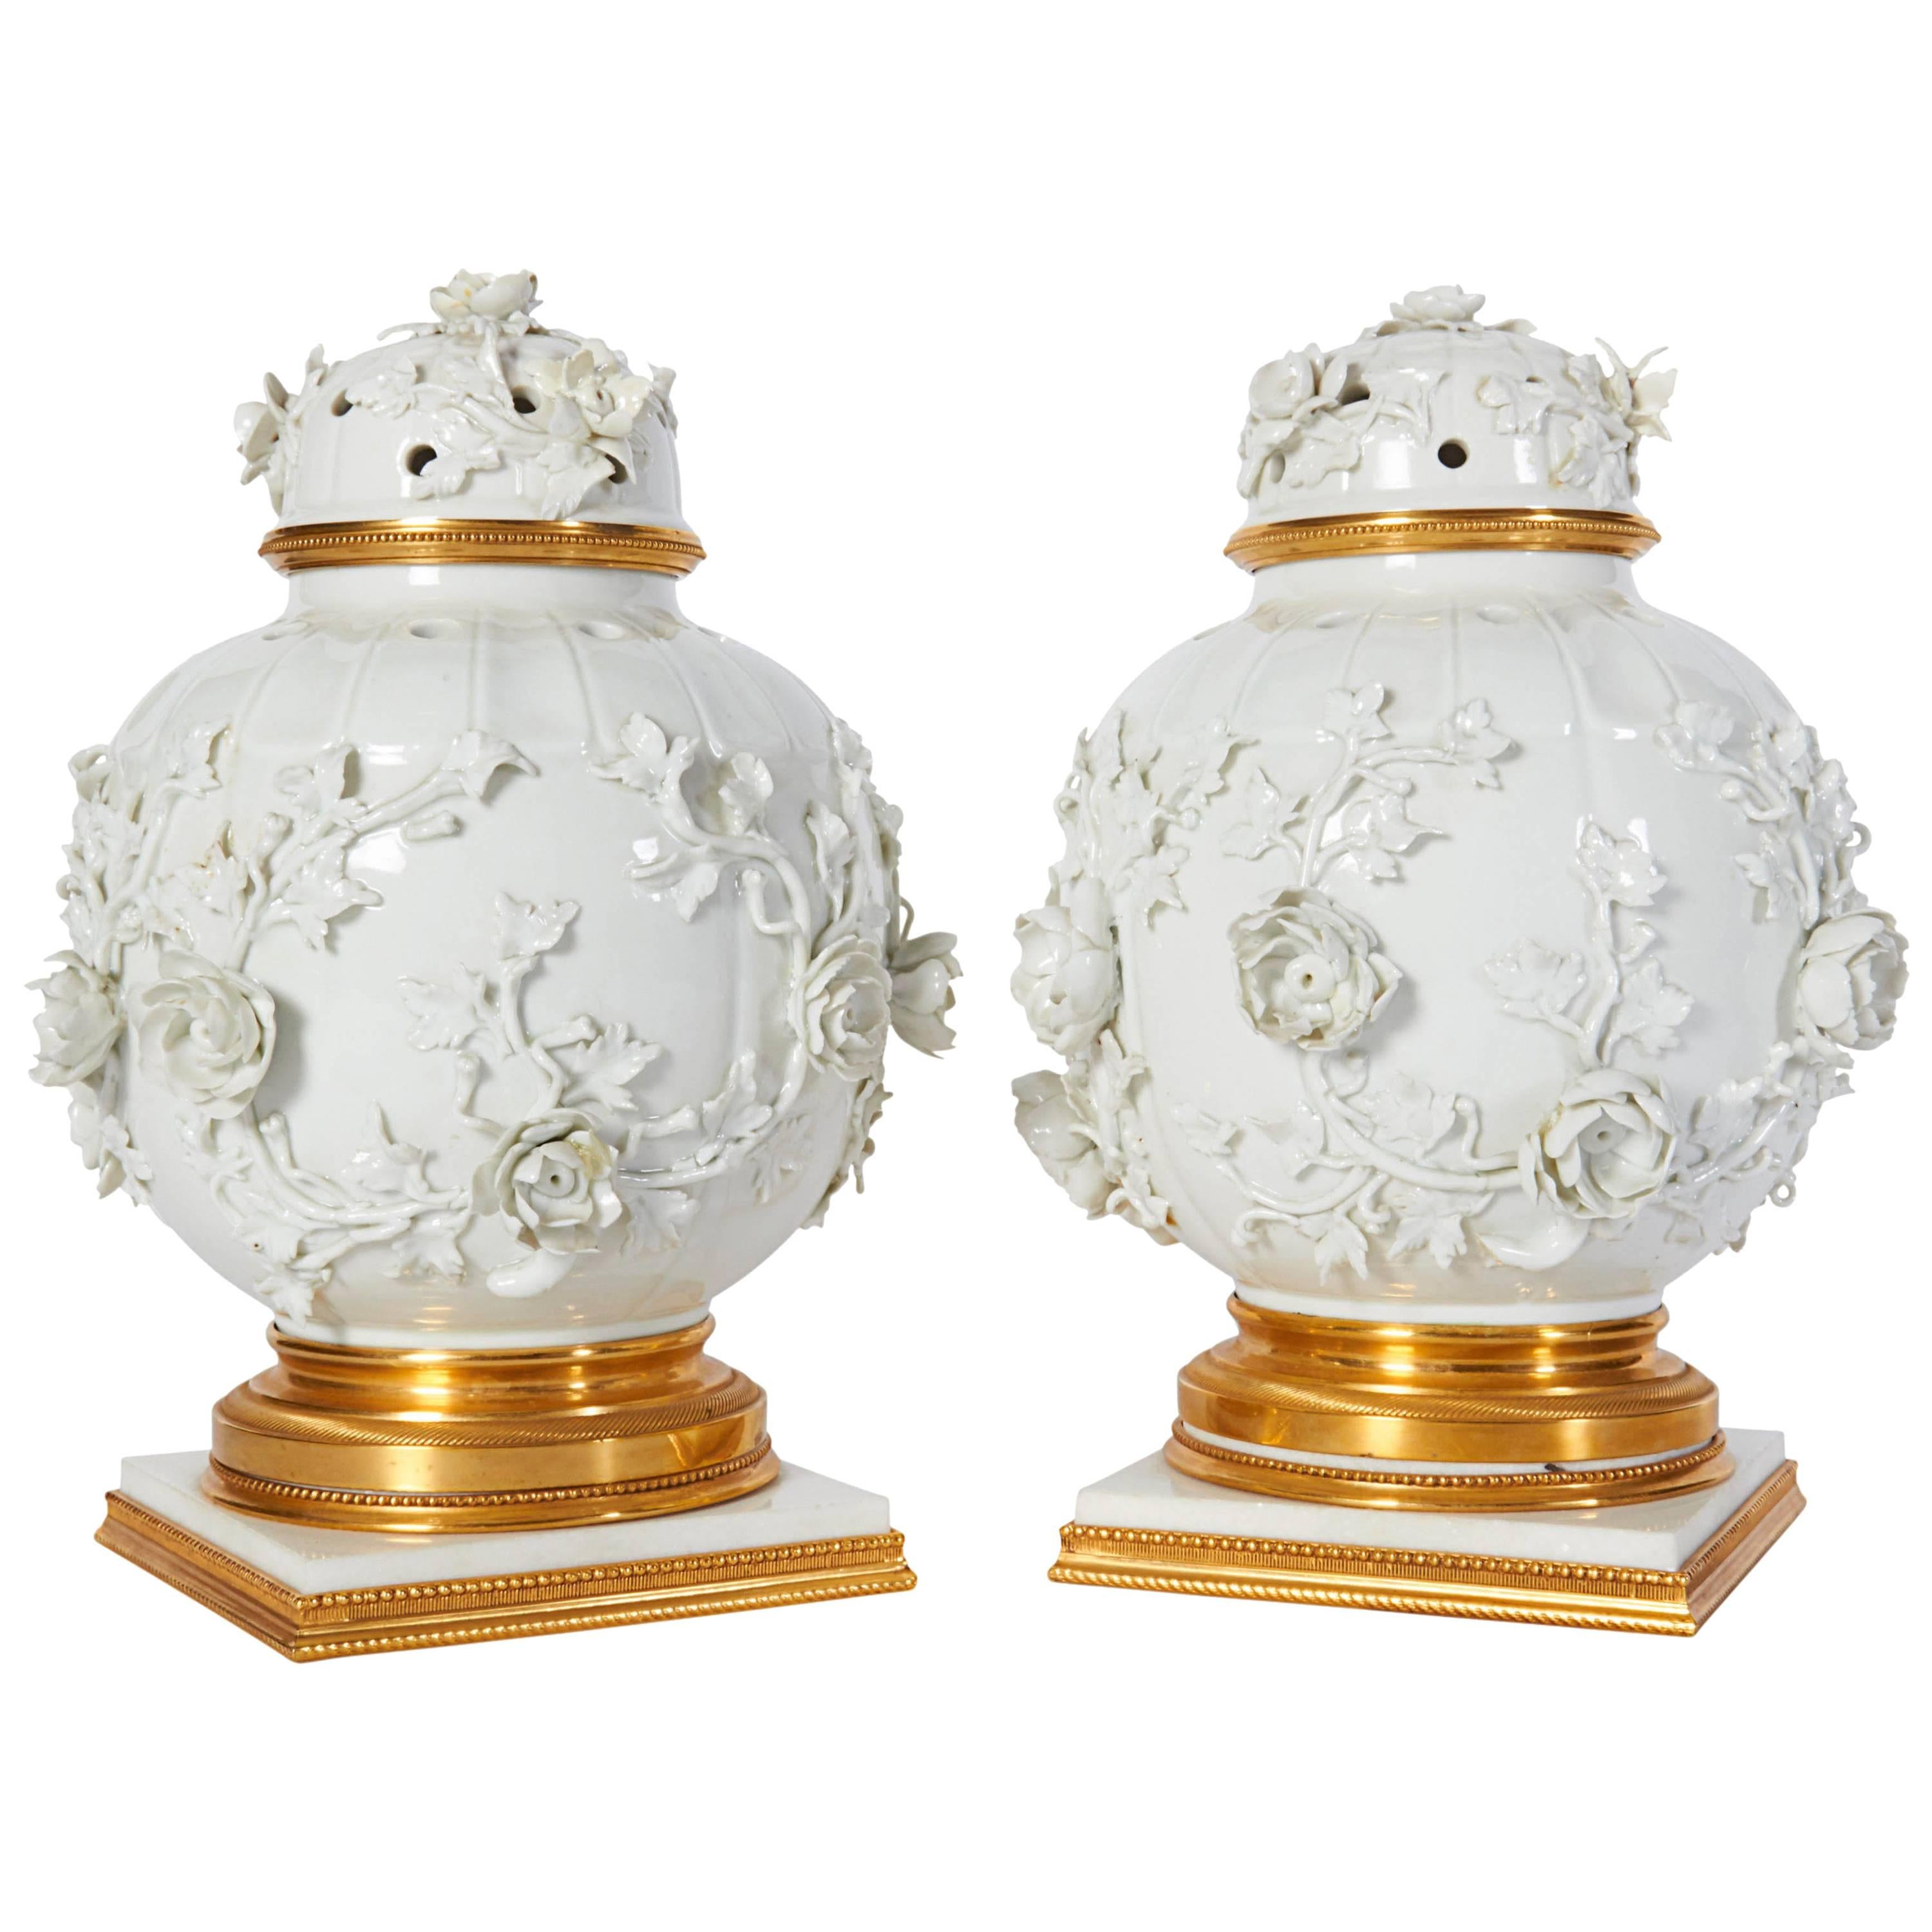 Chinese Blanc de Chine Porcelain & Ormolu-Mounted Potpouri Vases and Cover, Pair